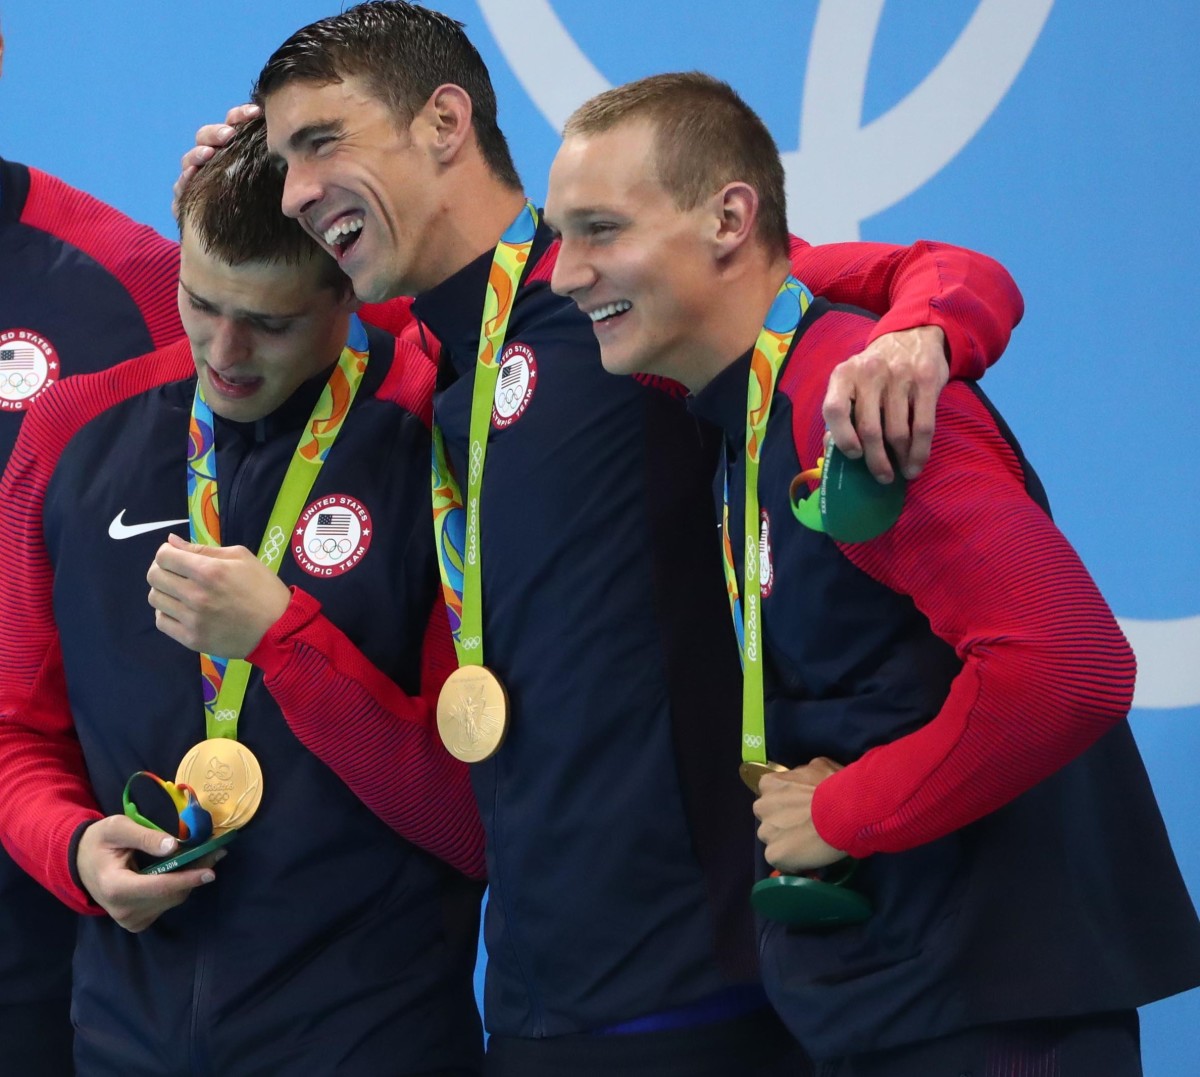 Ryan Held (far left) shows his emotion with teammates Michael Phelps and Nathan Adrian